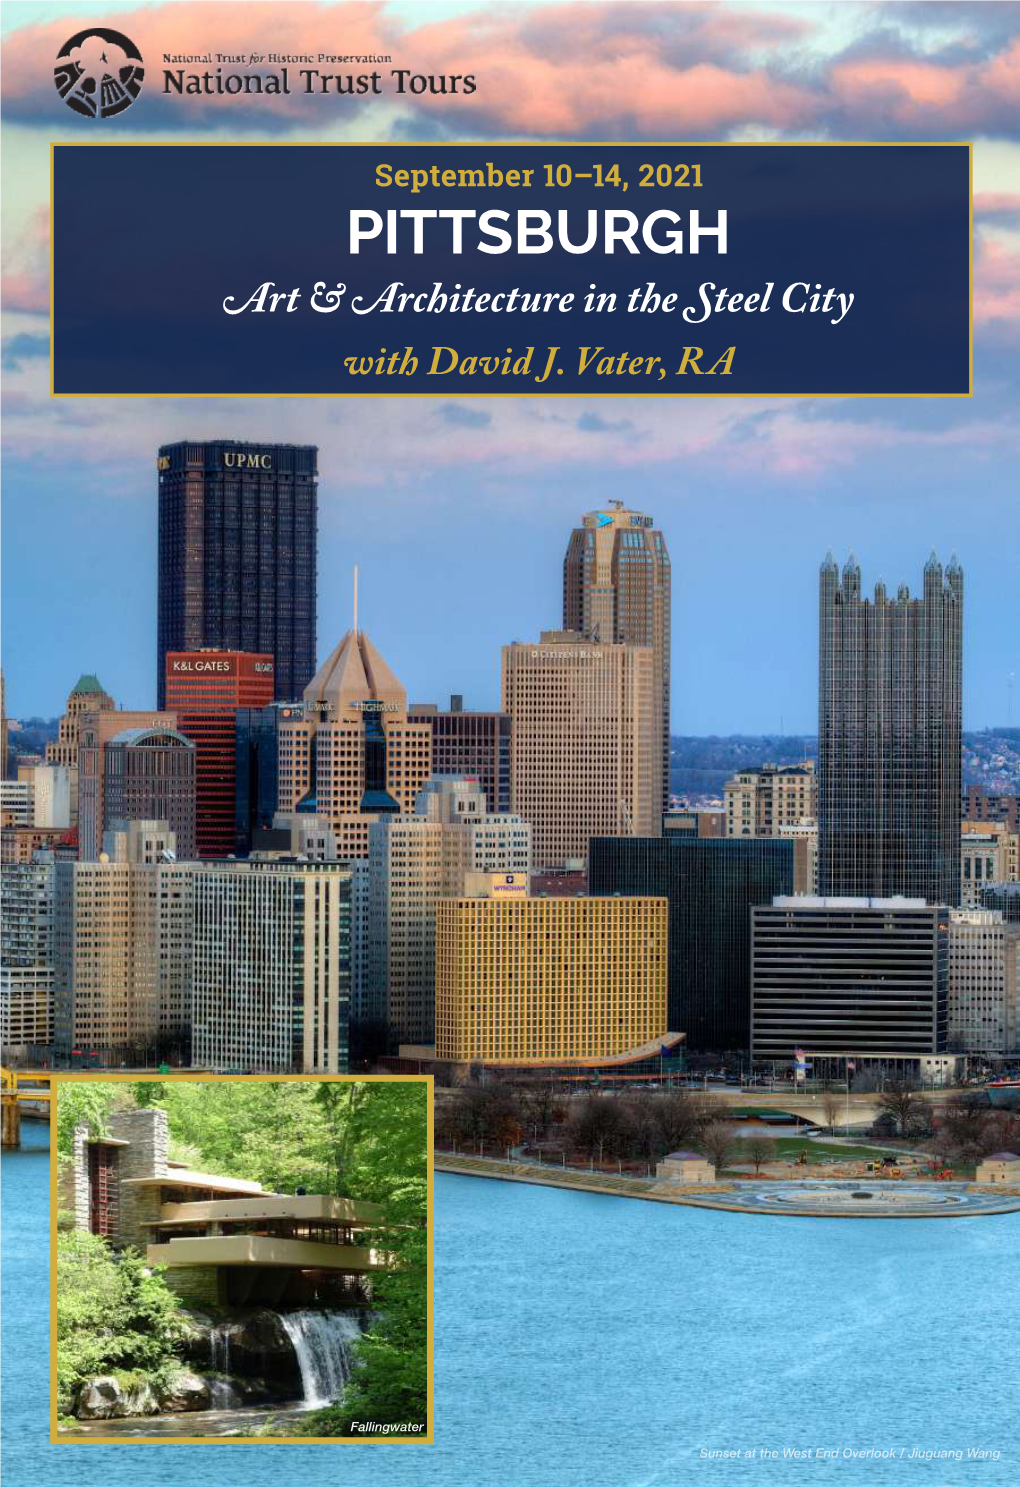 PITTSBURGH Art & Architecture in the Steel City with David J